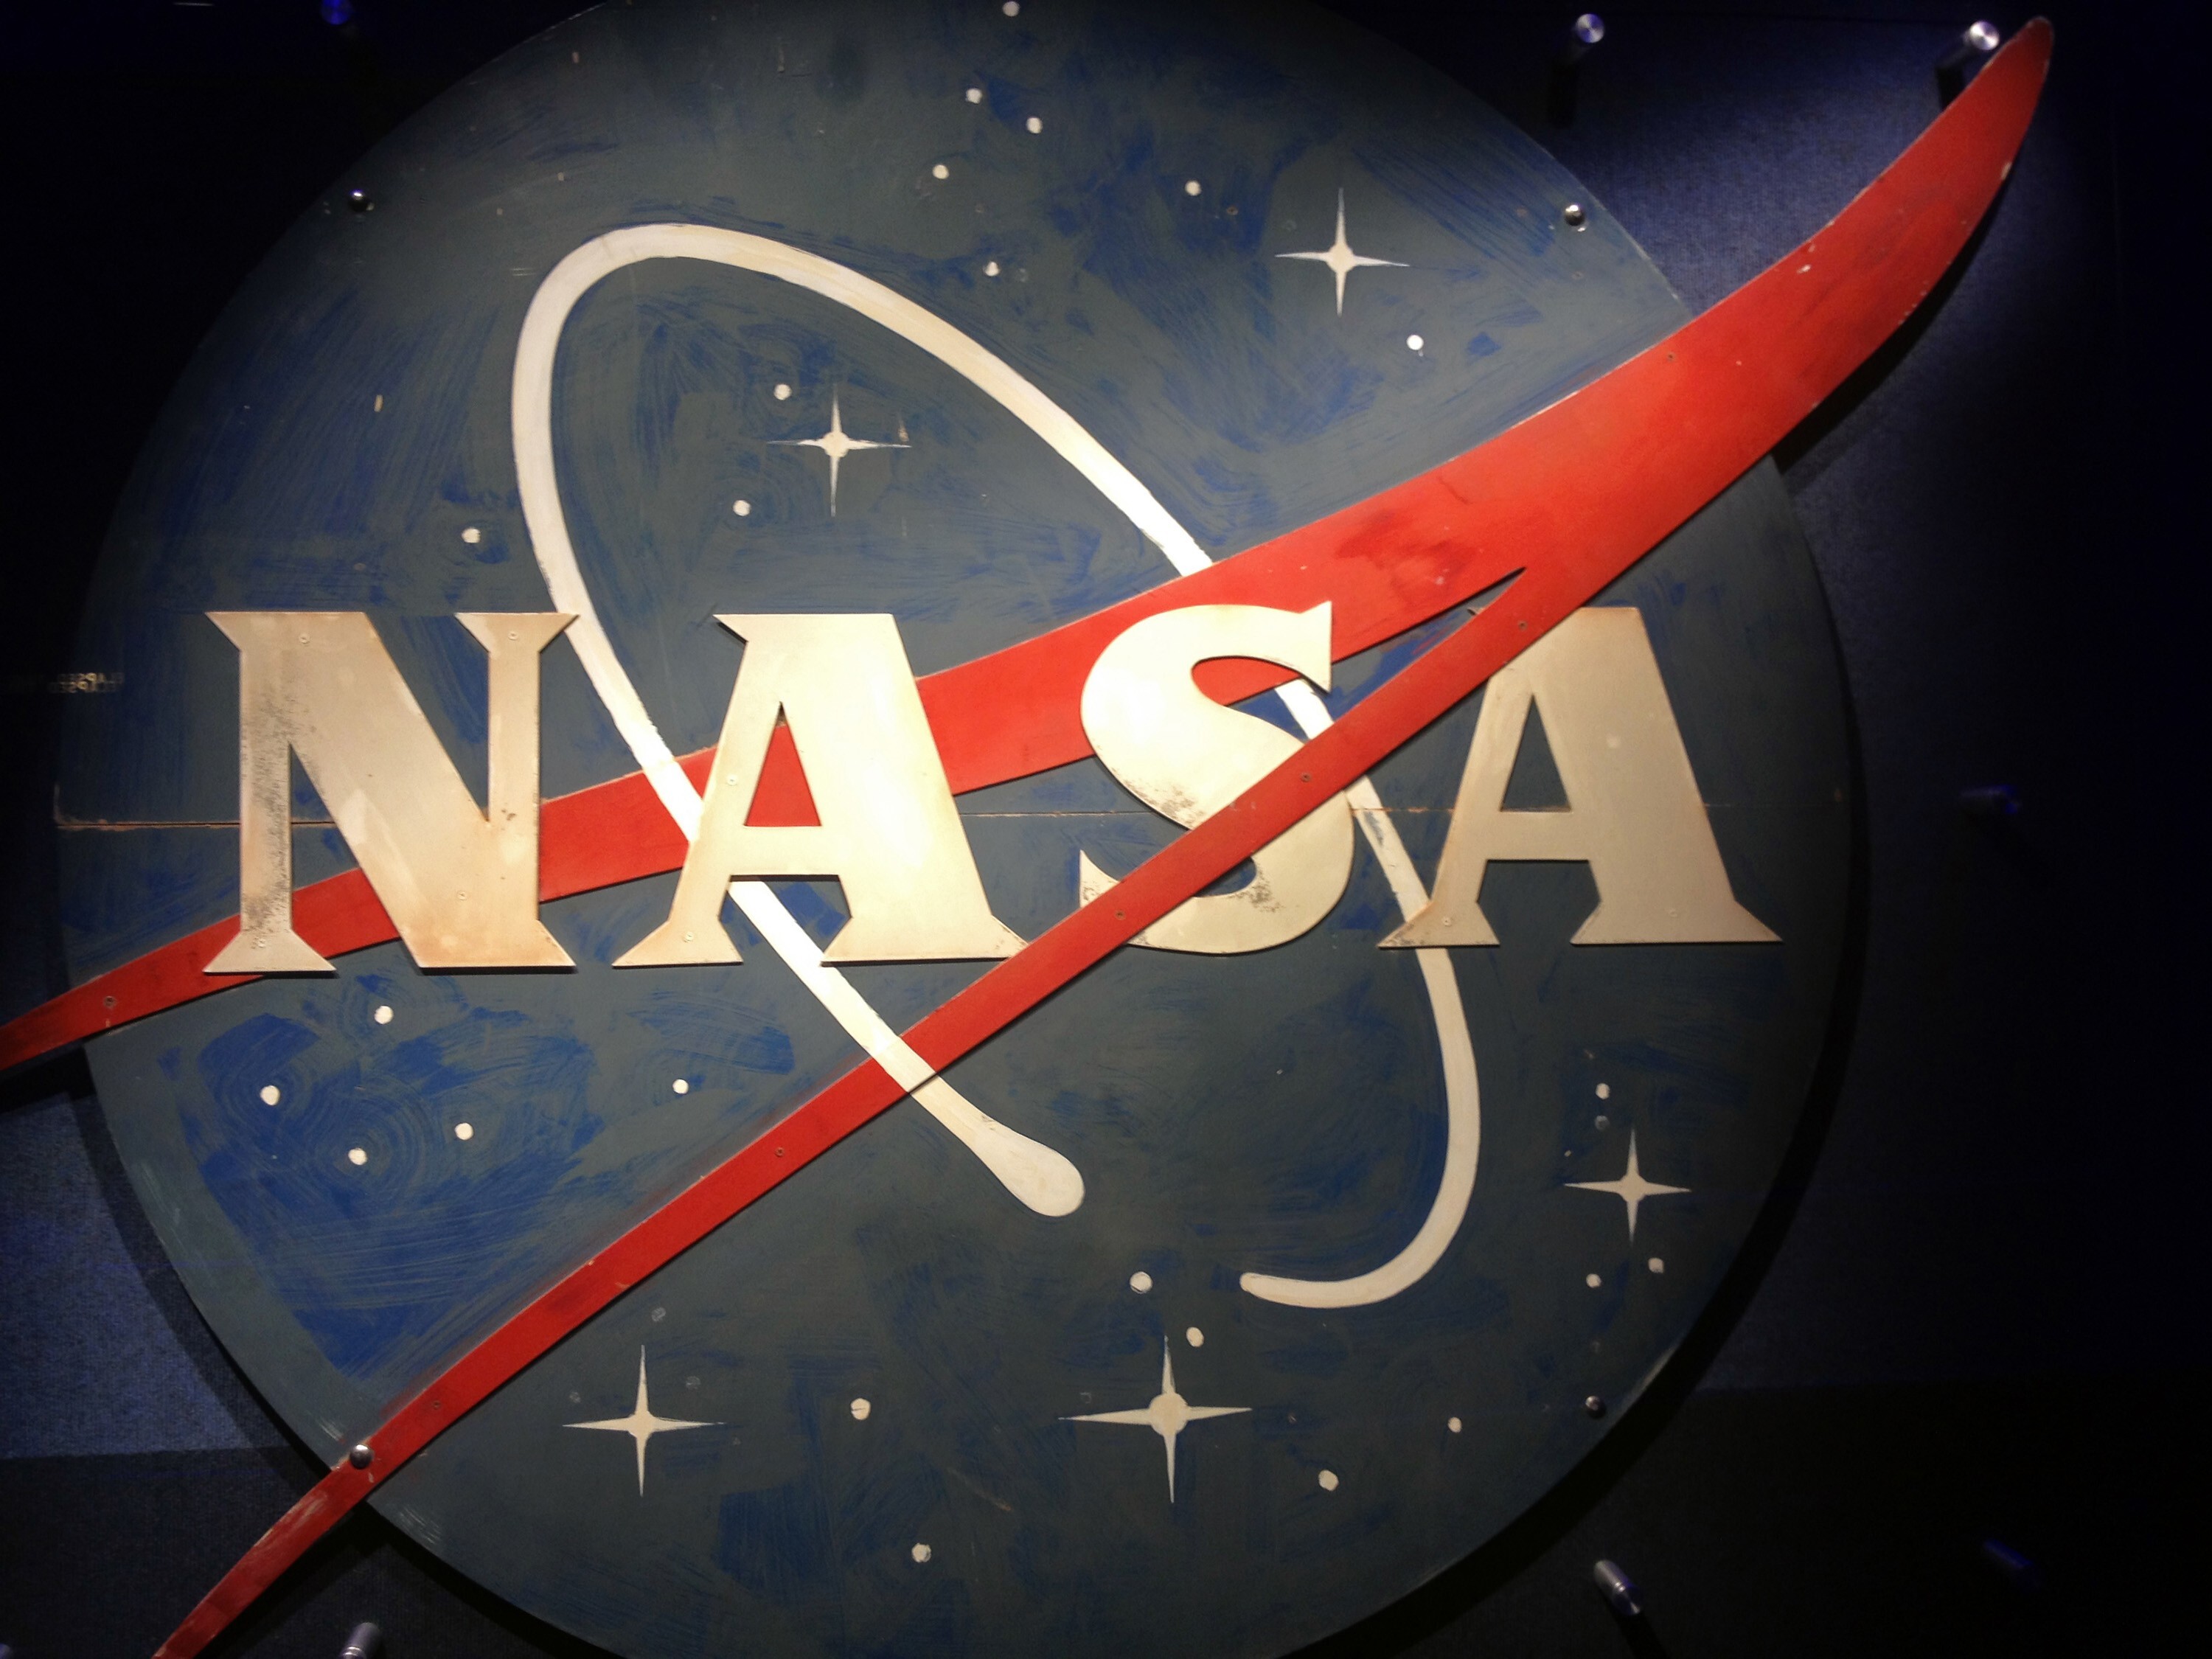 A Malaysian student who took part in a Nasa contest in March and later received an email saying he had won a scholarship, has warned others to check for authenticity before posting such news. Photo: TNS